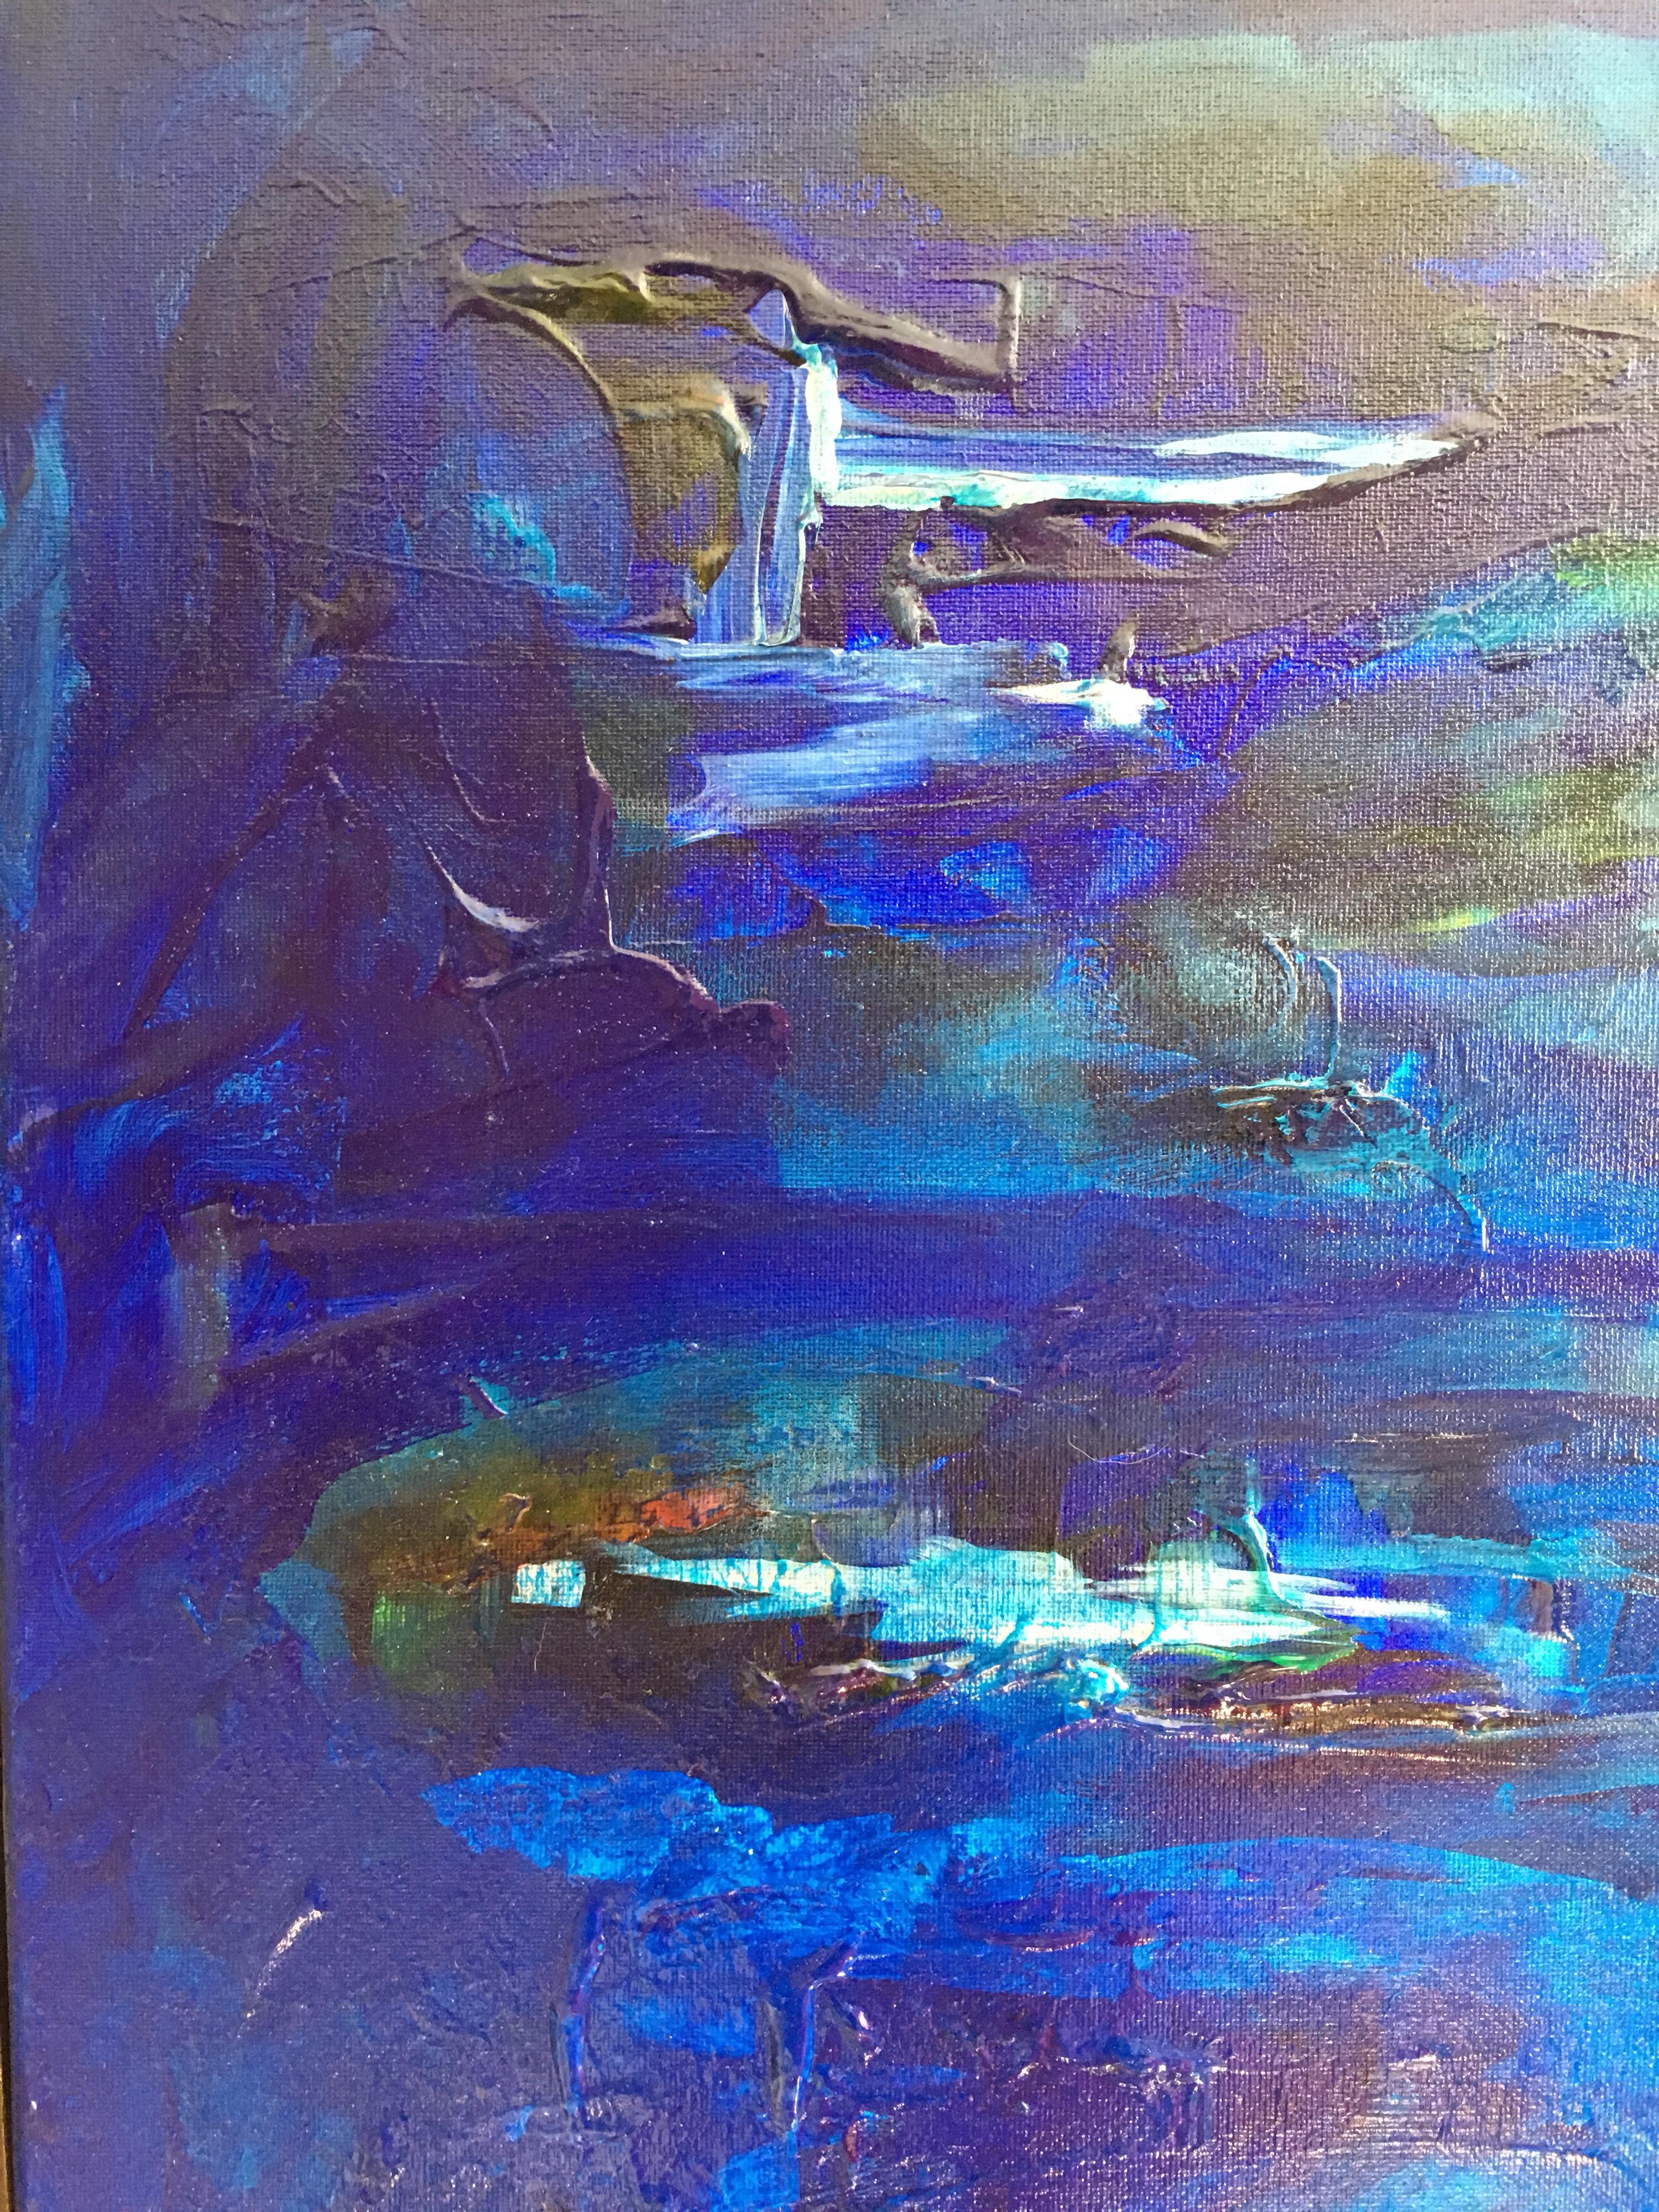 Open Blue, Abstract Oil Painting, Signed
By British Schooled artist, 21st Century
Signed indistinctly on the back top corner
Oil painting on canvas, unframed
Canvas size: 23 x 19.5 inches

Undeniably stylish abstract oil painting, using a rich